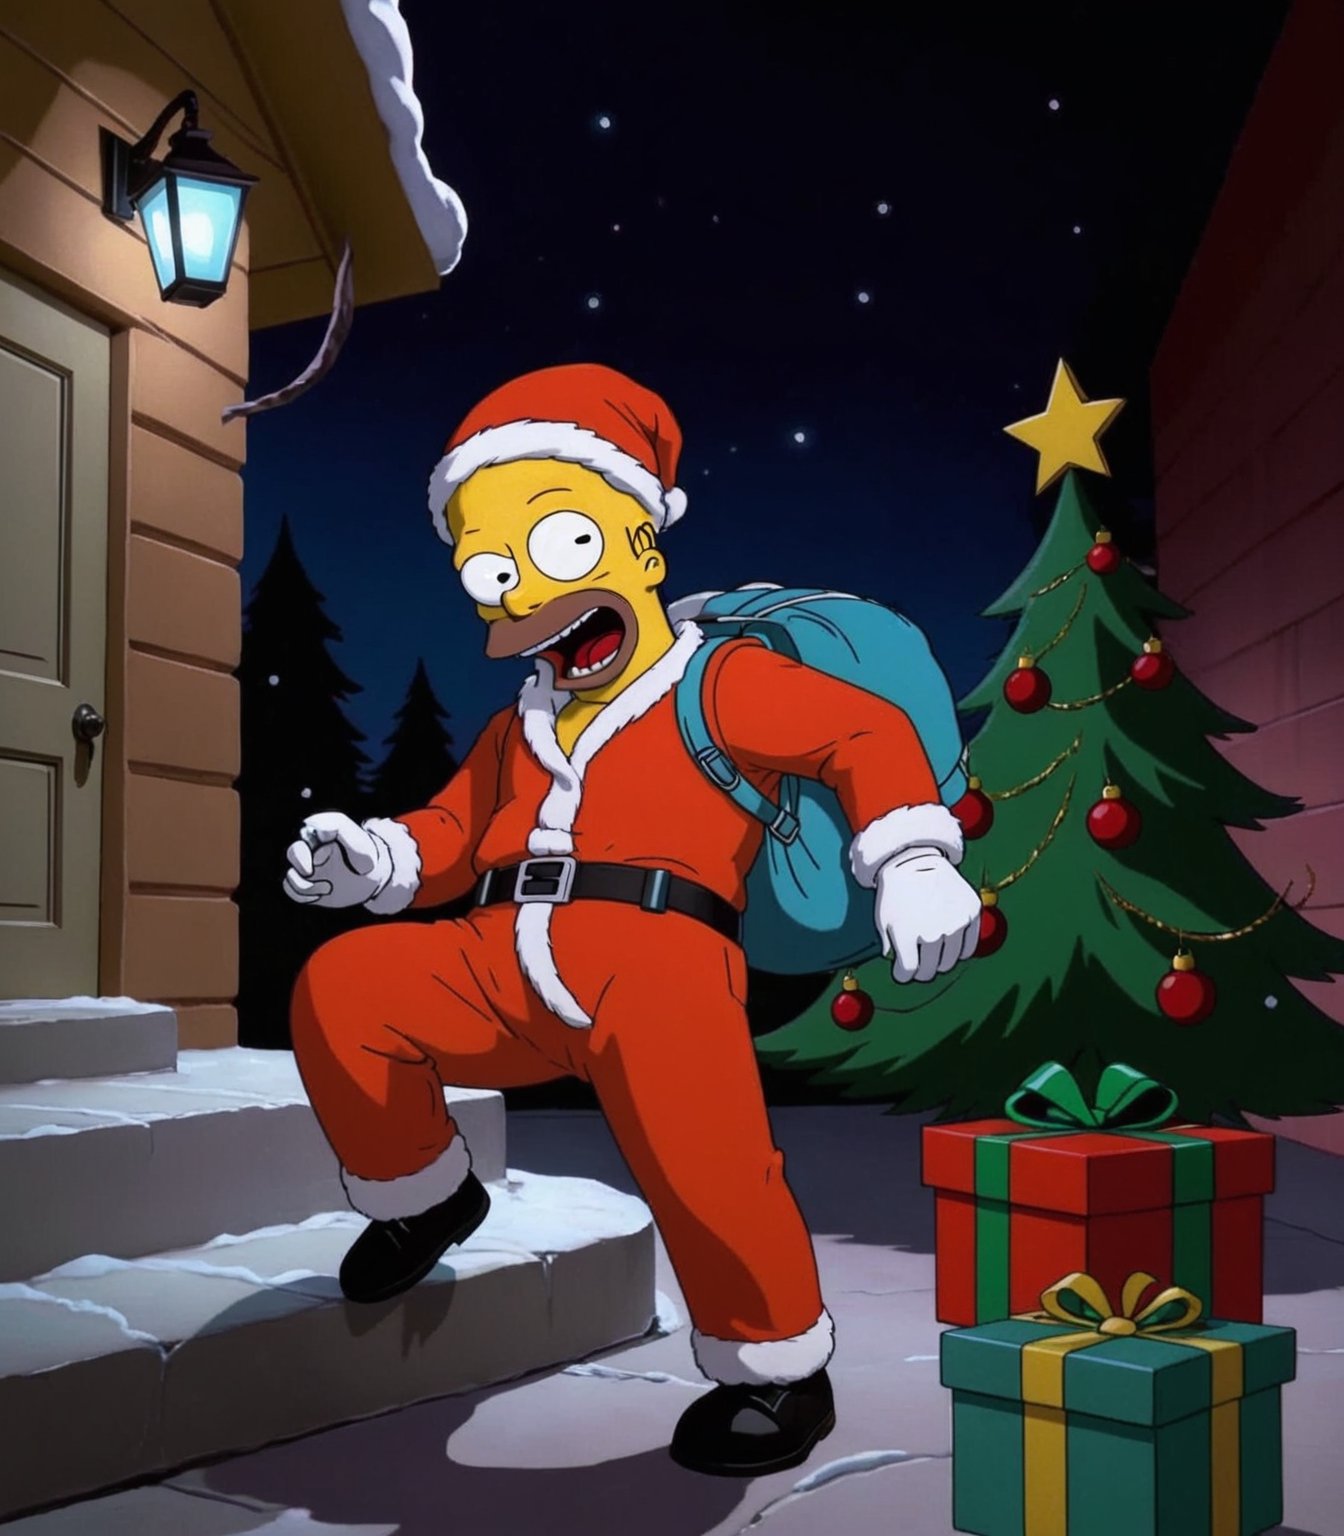 Masterpiece in high-resolution HD, featuring a chibi and cartoon style, inspired by the vibrant aesthetic of ((The Simpsons)). | Ghost Face, known for his frightening presence, surprises by donning a red Santa Claus costume. With his stylized chibi form, he strikes a mischievous pose, holding a bag of presents with a sly look. The smooth lines and vibrant colors highlight the contrast between the sinister nature of the character and the festive atmosphere. | The composition presents Ghost Face in the foreground, with a tilted angle to emphasize the mischievous expression. The background is filled with festive elements such as Christmas trees, gifts, and twinkling lights. | Cinematic lighting effects accentuate the shadows on Ghost Face's face, while contour lines add a cartoon touch to the scene. | Ghost Face in Santa chibi costume, surprising with a mischievous pose and a bag of presents. | {The camera is positioned very close to him, revealing his entire body as he adopts a dynamic pose, interacting with and leaning on a structure in the scene in an exciting way} | He is adopting a dynamic pose as he interacts, boldly leaning on a structure, leaning back in an exciting way, perfect_pose, full body, perfect_fingers, perfect_legs, perfect_hands, More Detail, ghostface mask